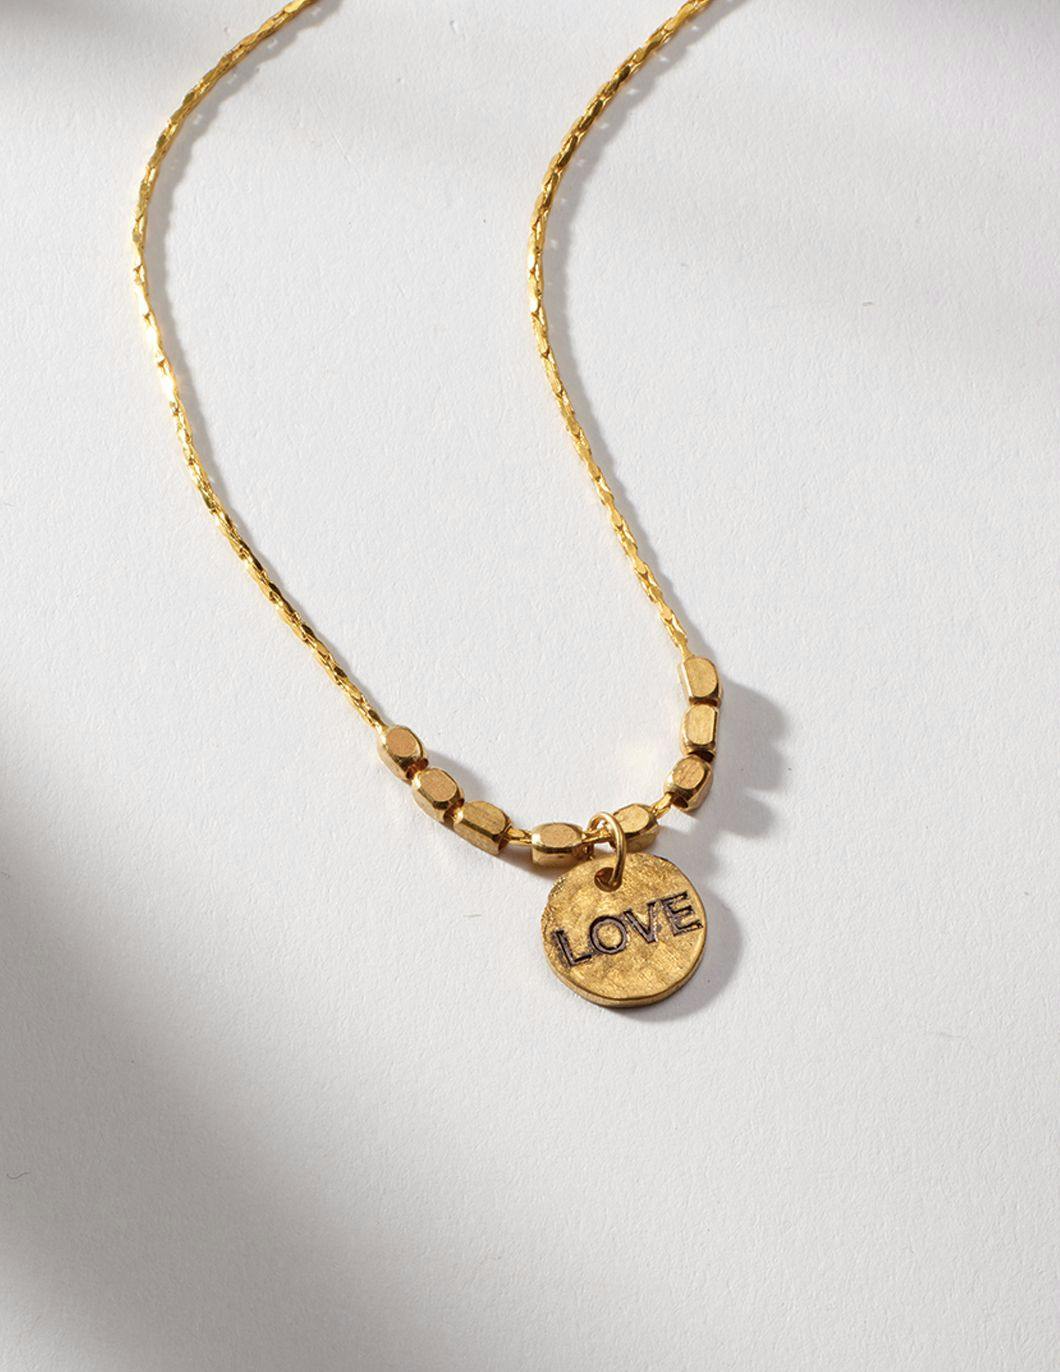 brass-hand-stamped-love-necklace-on-delicate-vintage-chain